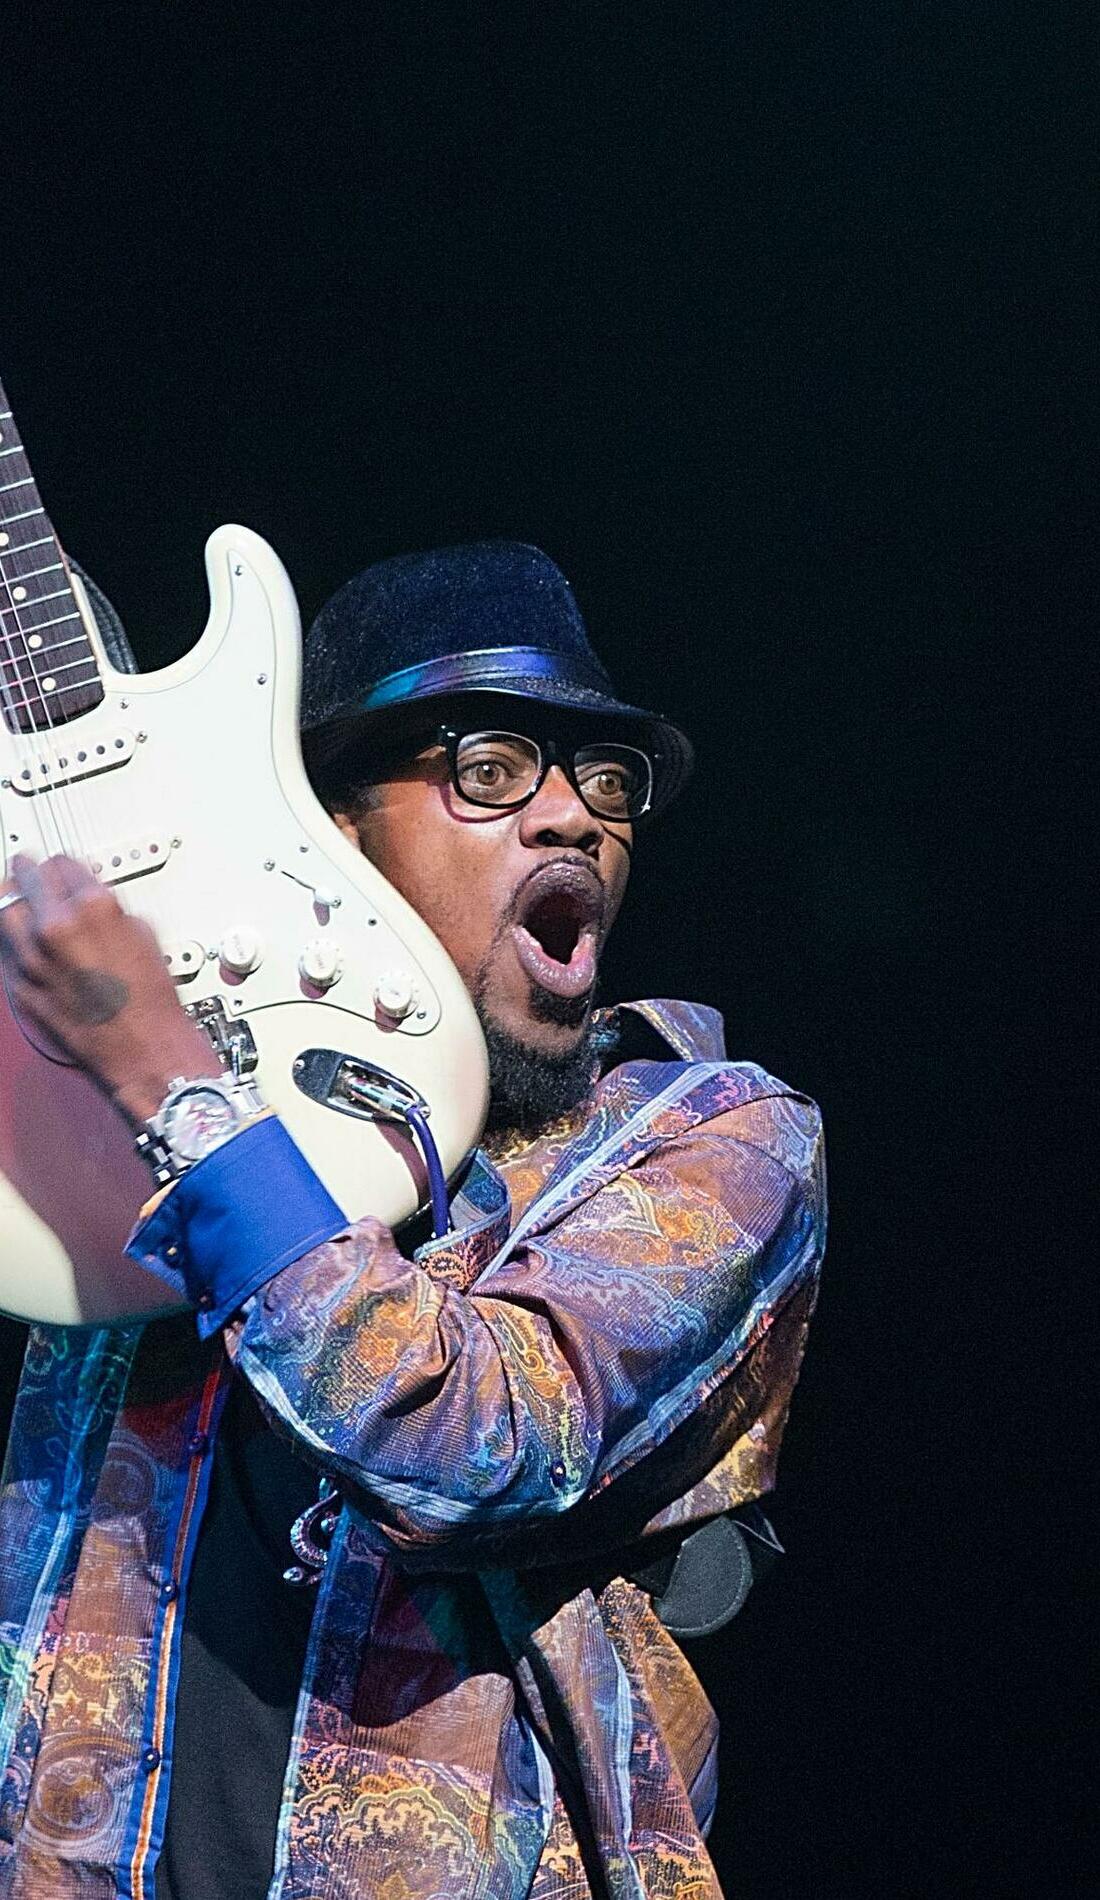 A Eric Gales live event